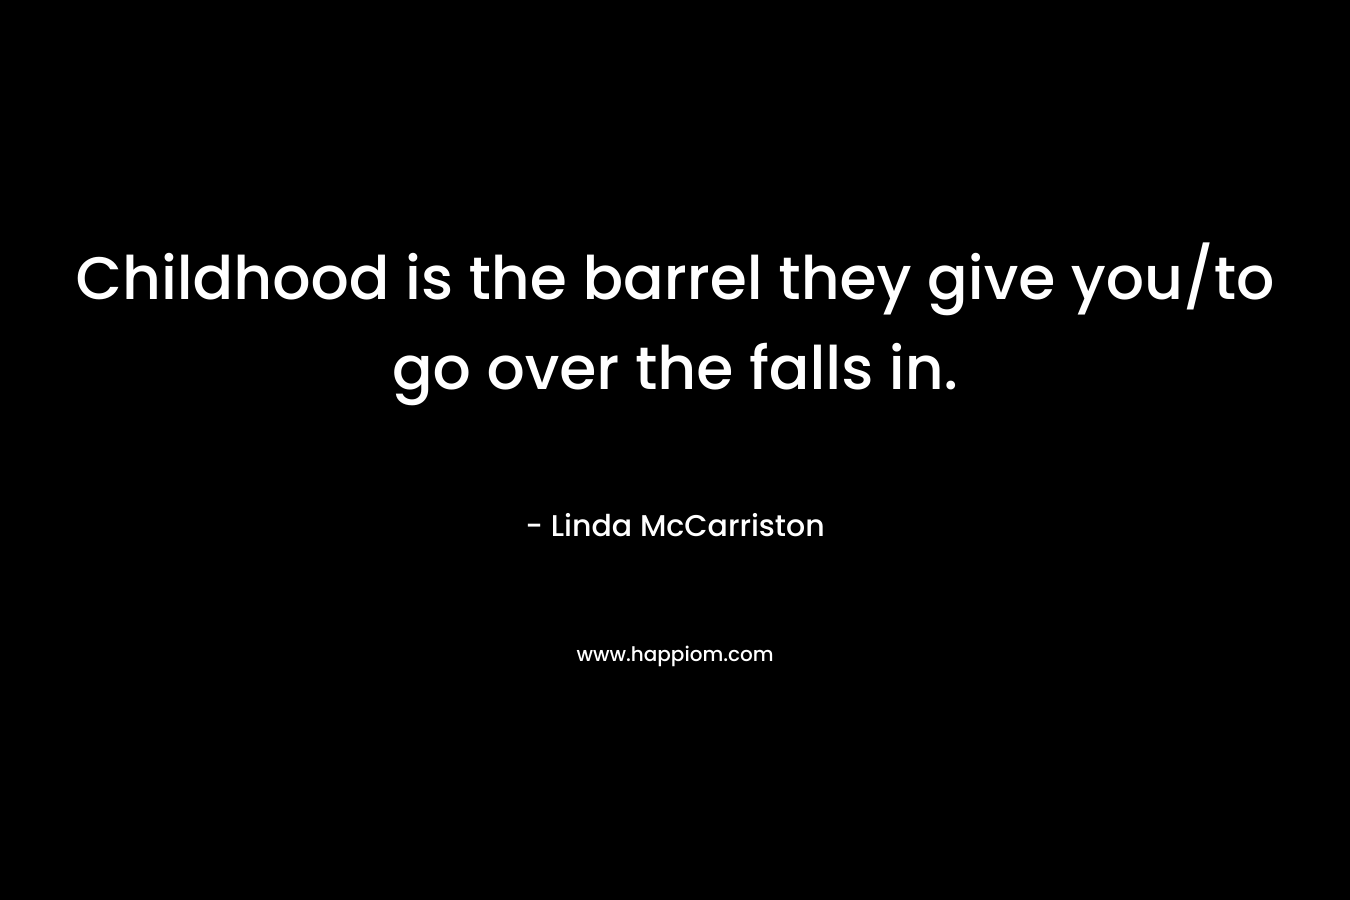 Childhood is the barrel they give you/to go over the falls in.